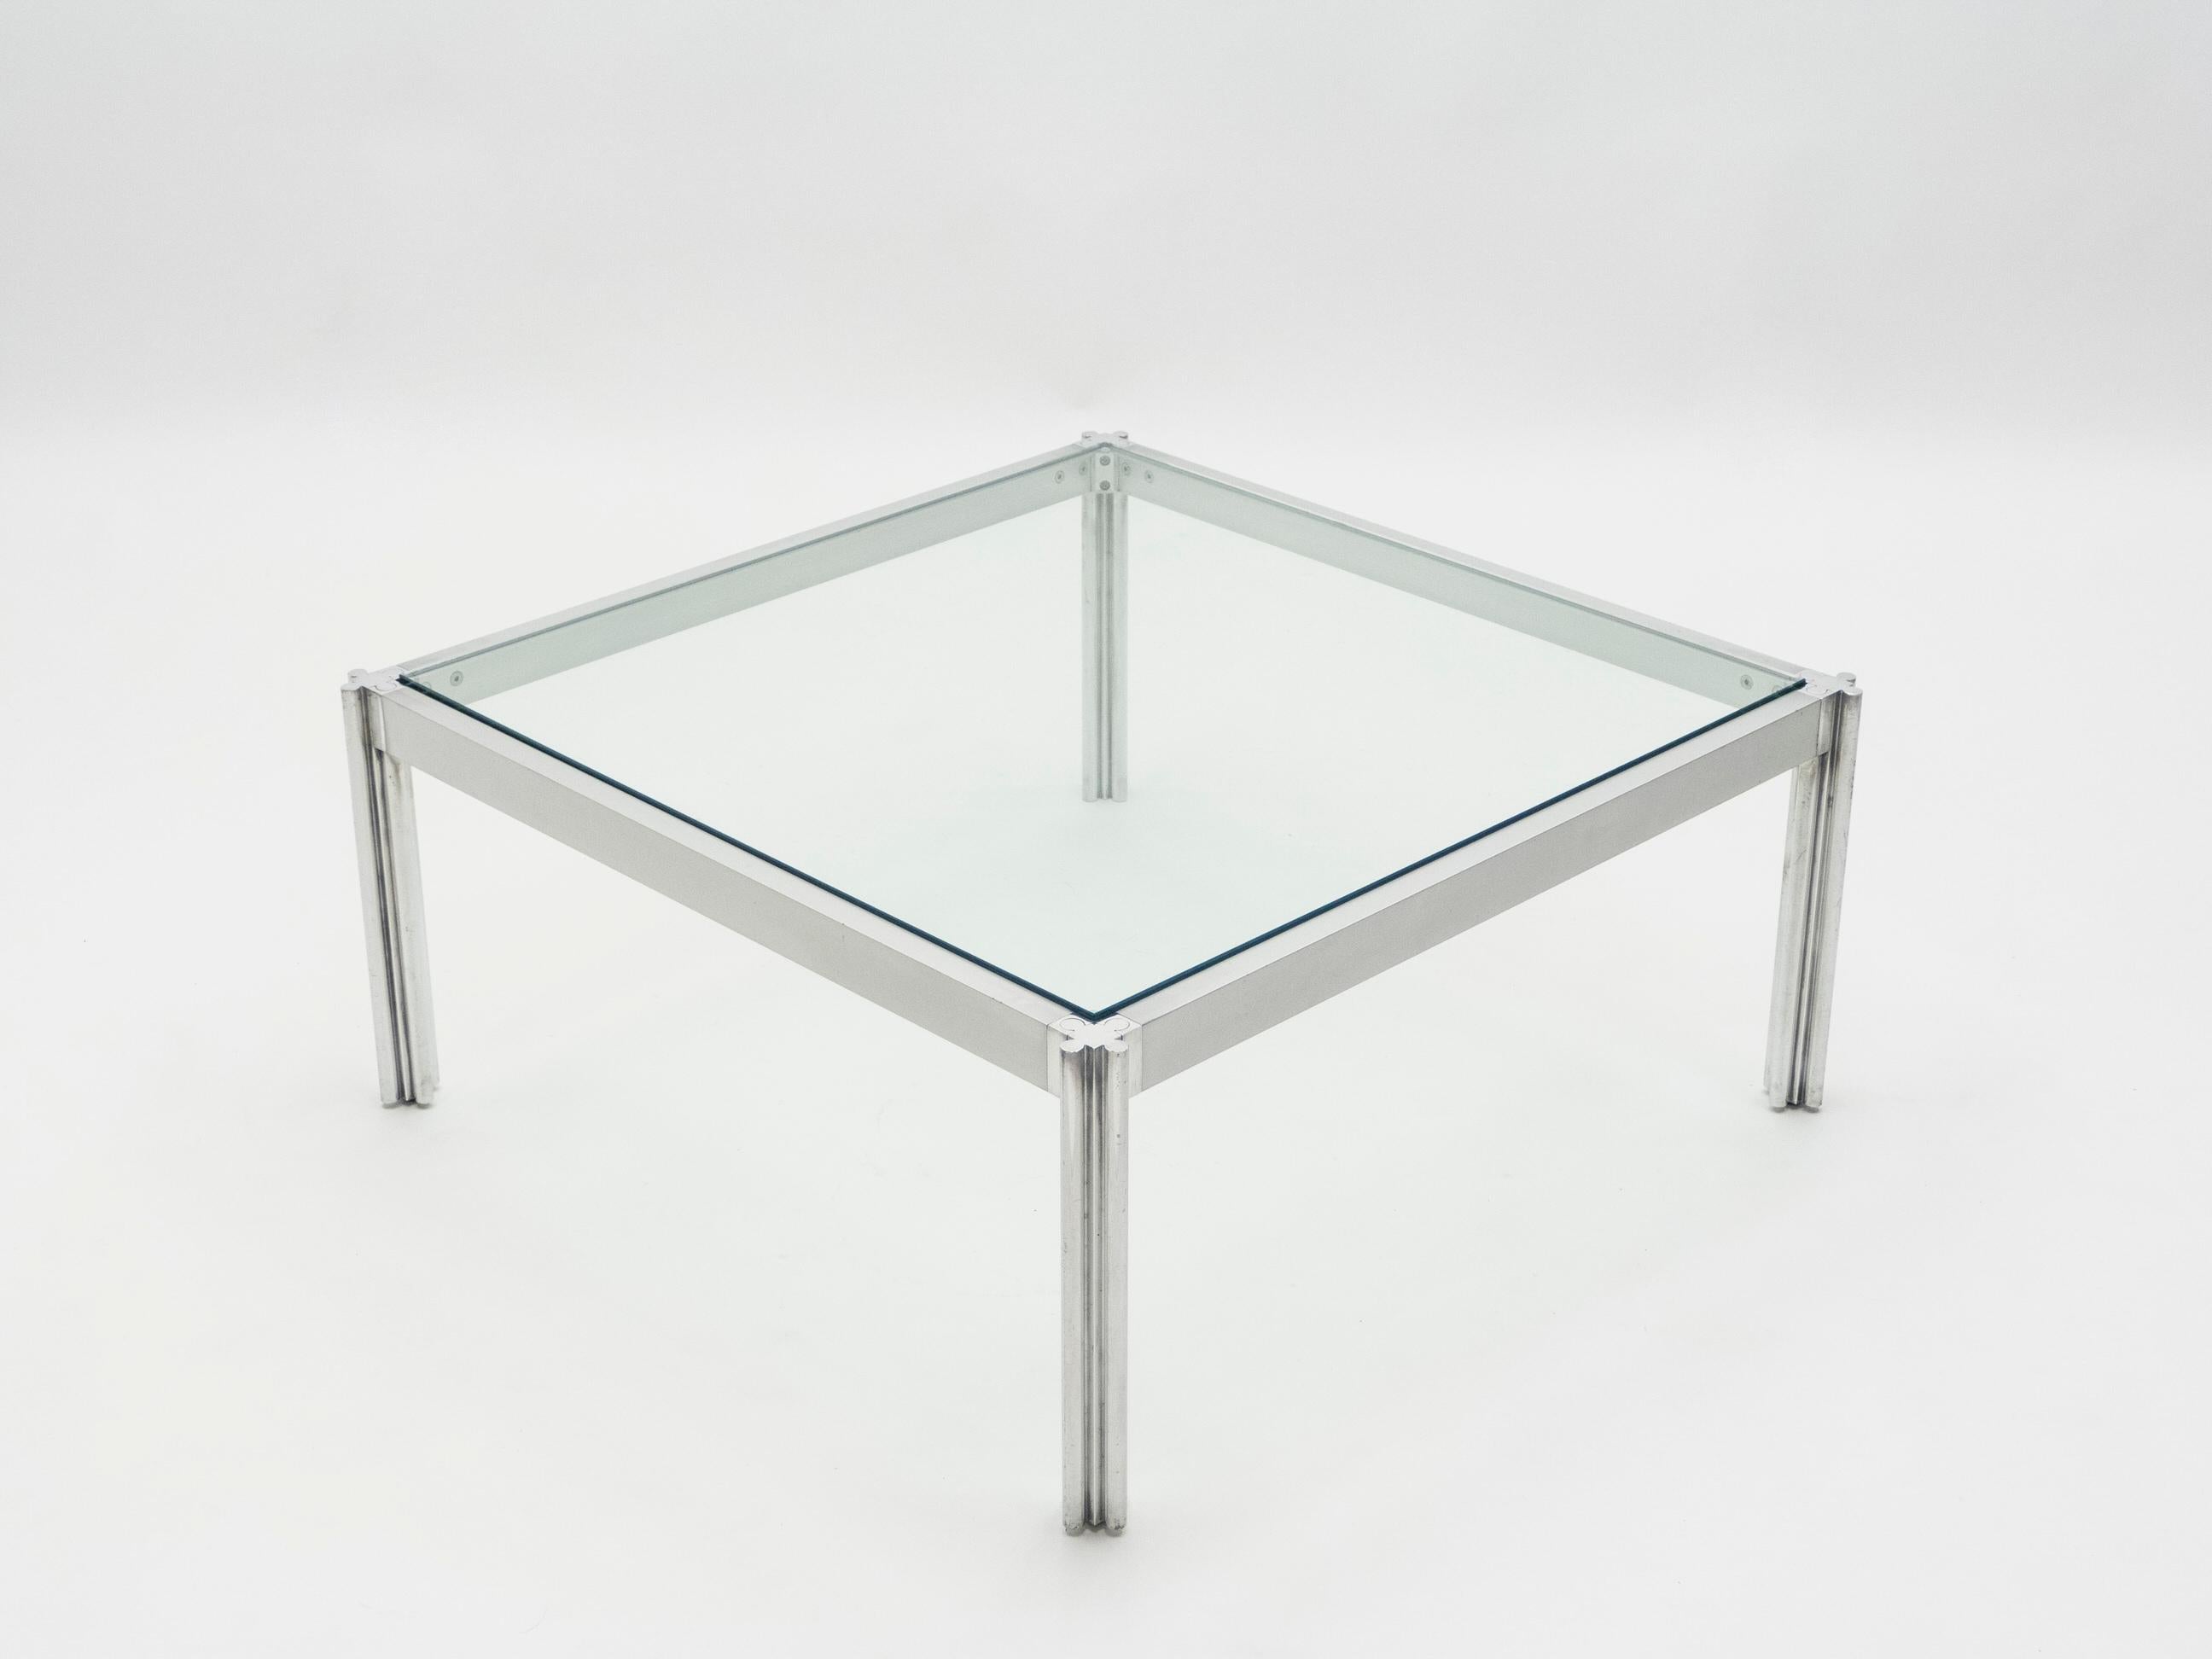 French Chrome Aluminum George Ciancimino Square Coffee Table, 1975